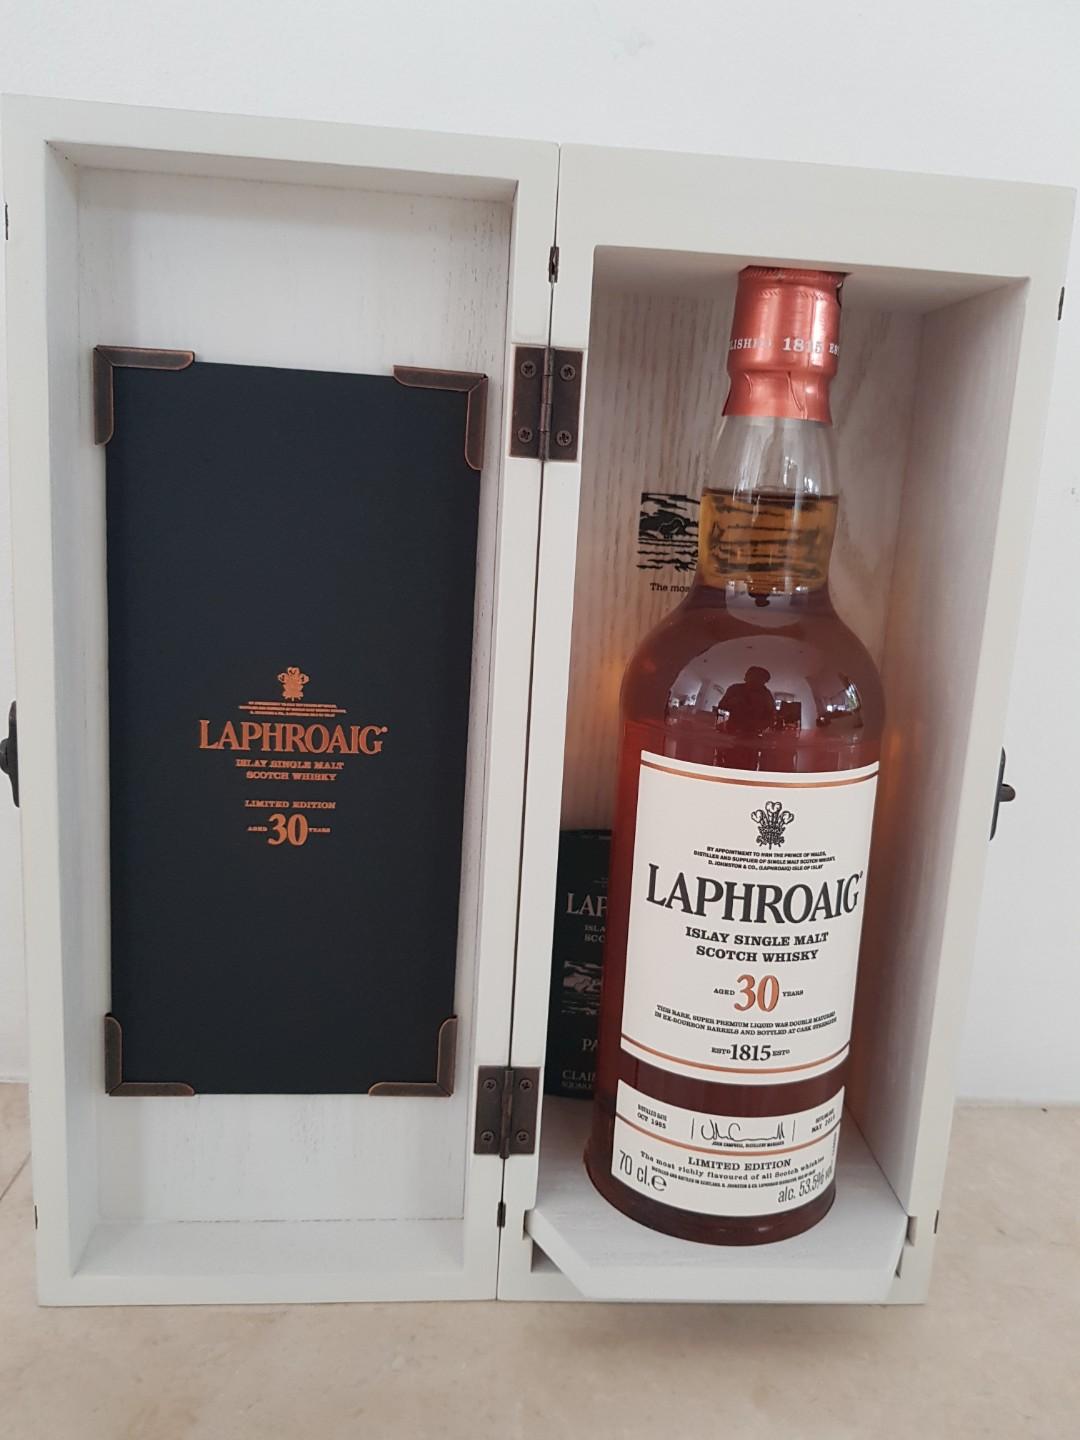 Laphroaig 30 years old Limited Edition